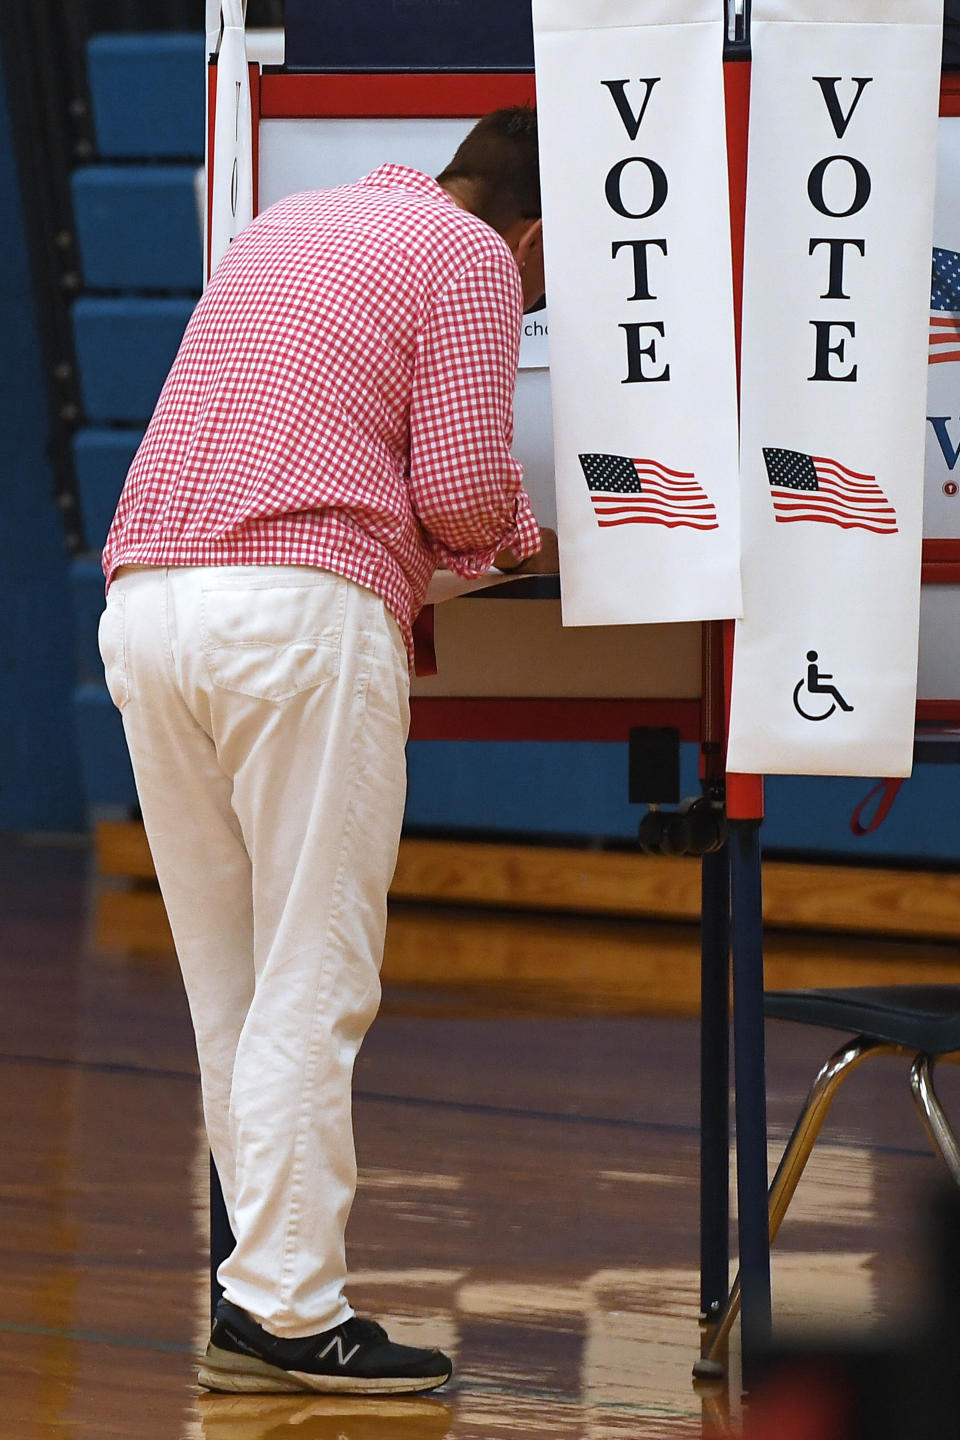 A voter casts a ballot on on primary election day, Tuesday, Aug. 9, 2022, in Suffield, Conn. Suffield is one of several small towns in Connecticut where control was flipped from Democrats to Republicans in 2021 municipal races. (AP Photo/Jessica Hill)